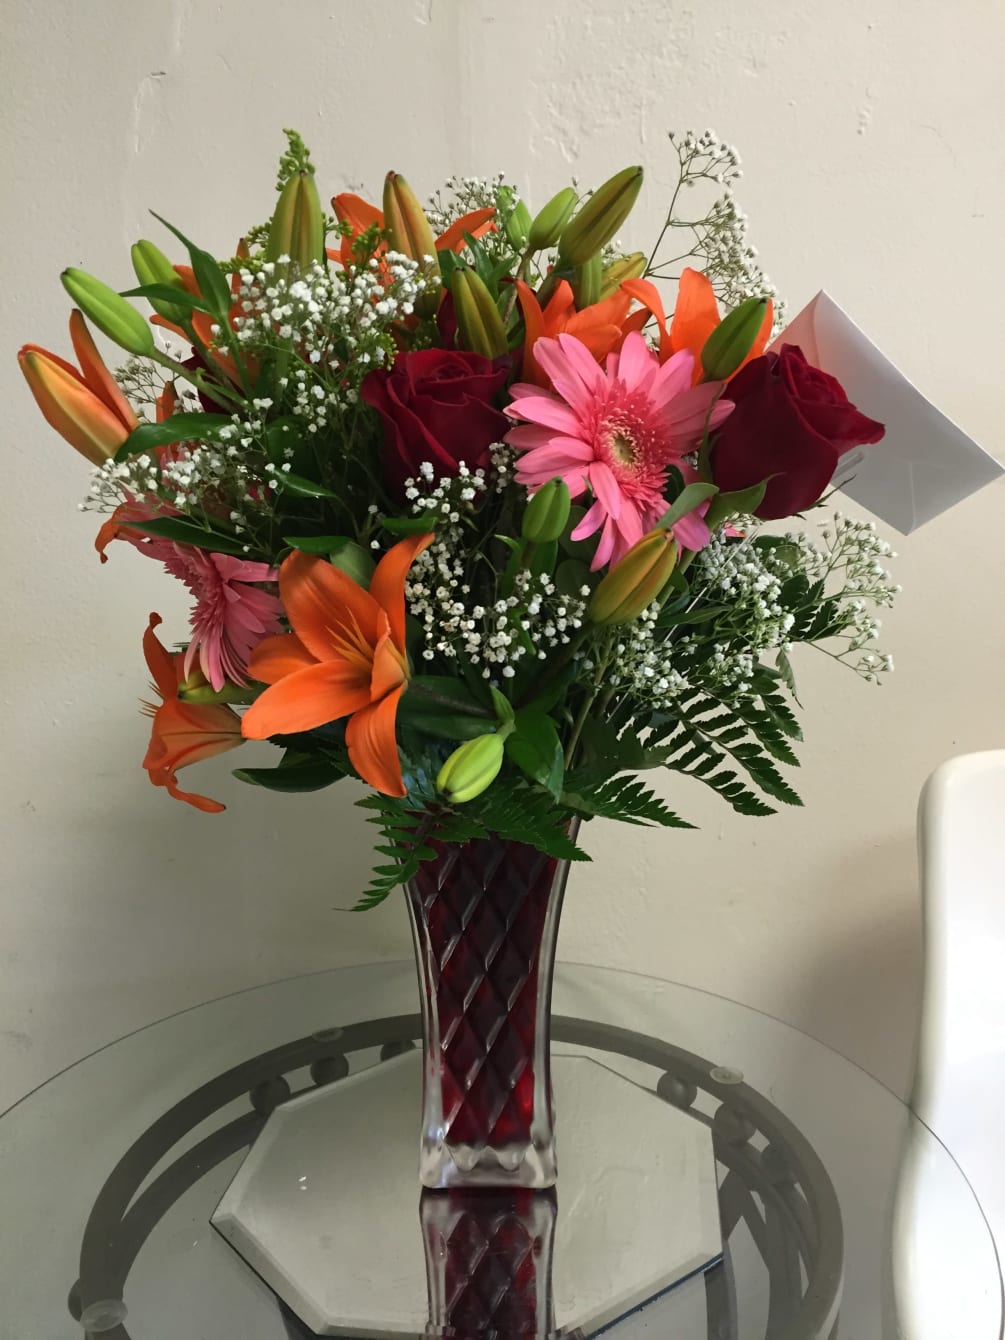 Nice Mix of flowers, gerbs, lilies, roses, baby breath and more

Flowers and